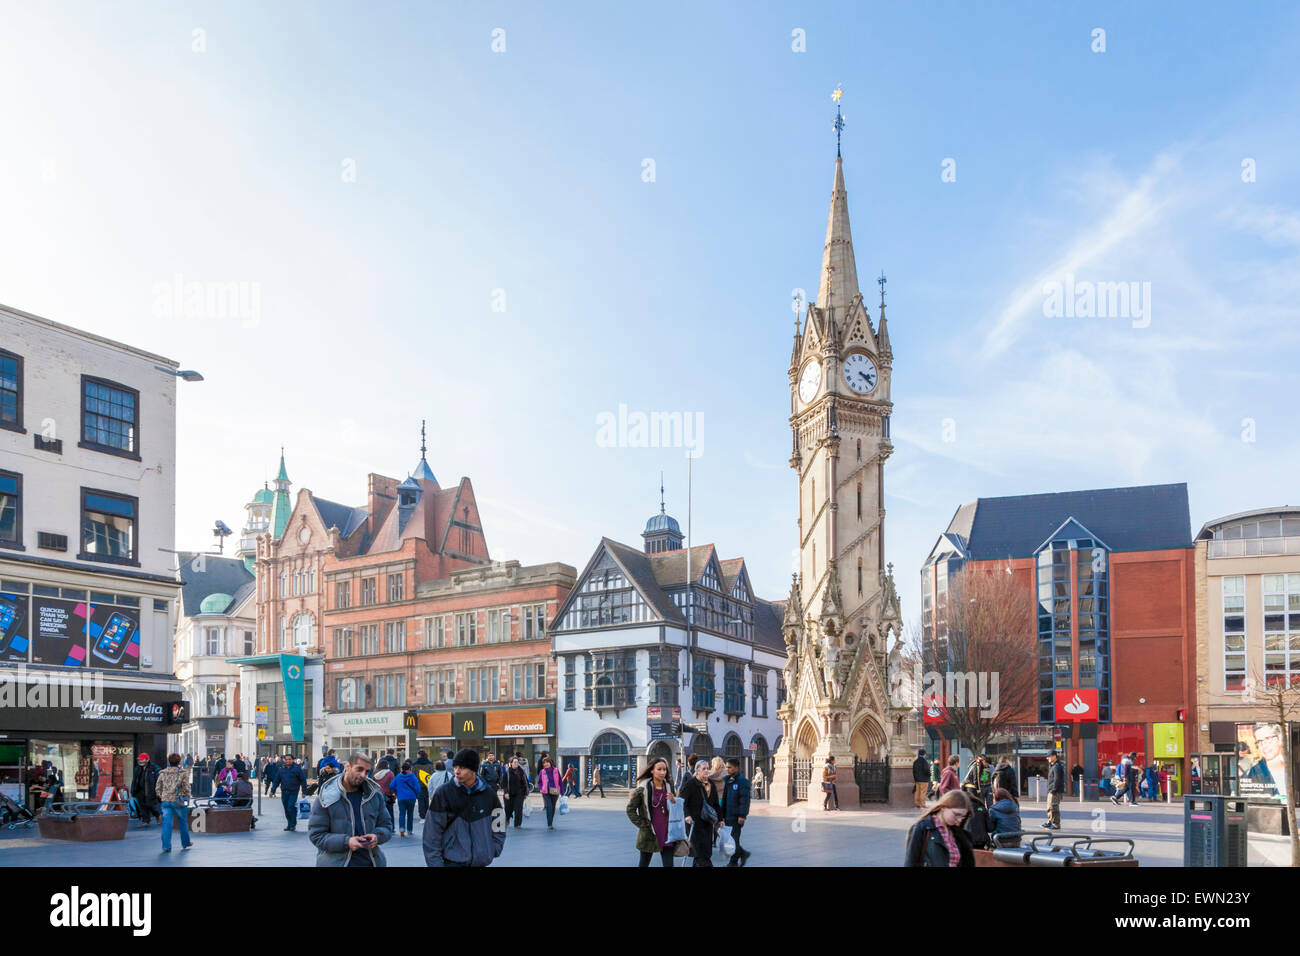 Haymarket Memorial Clock Tower in Leicester city centre, England, UK Stock Photo